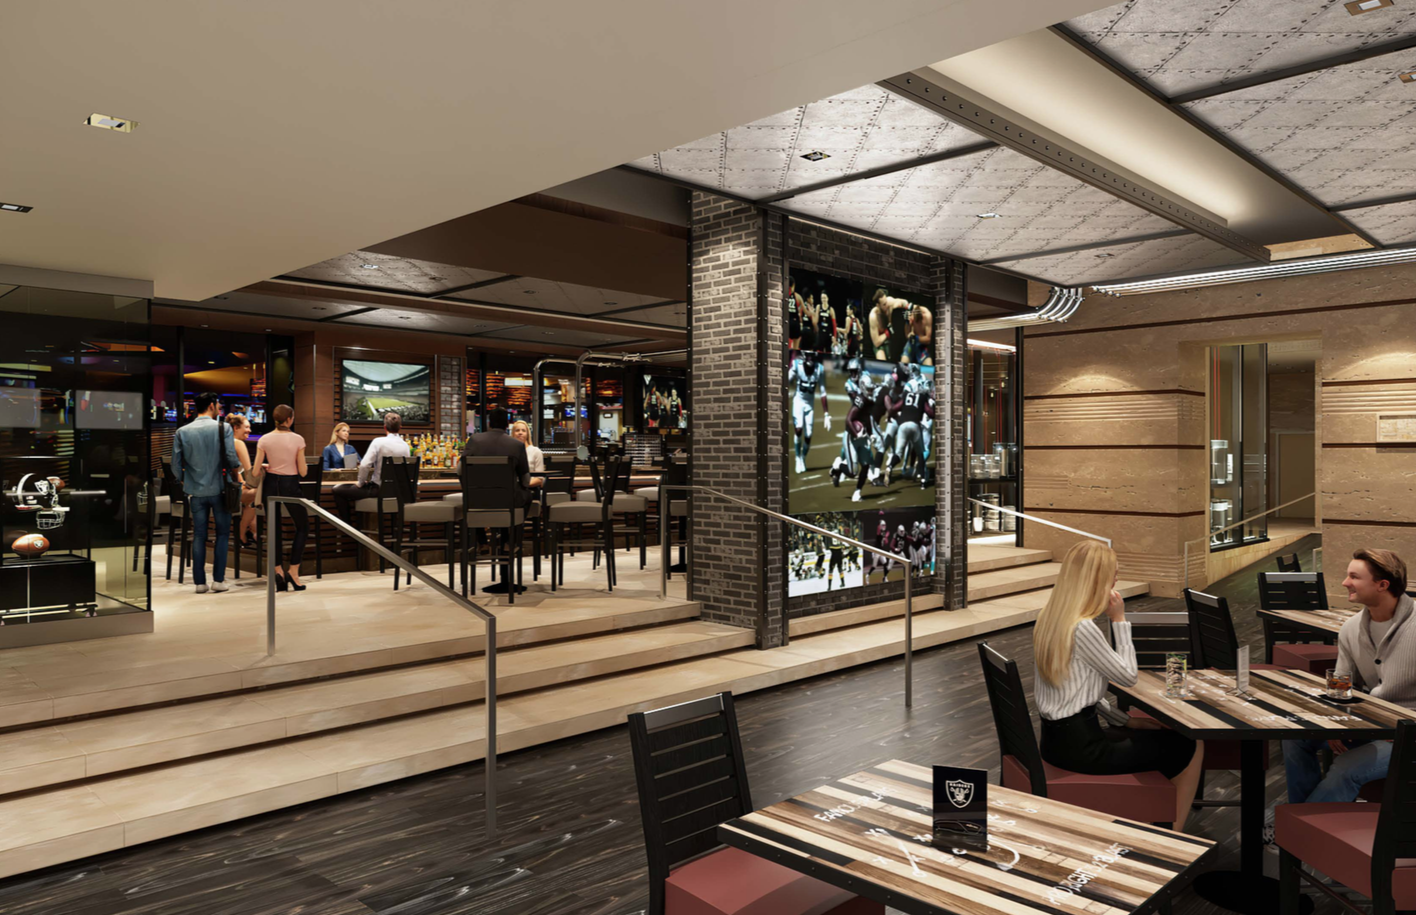 A rendering of a future restaurant